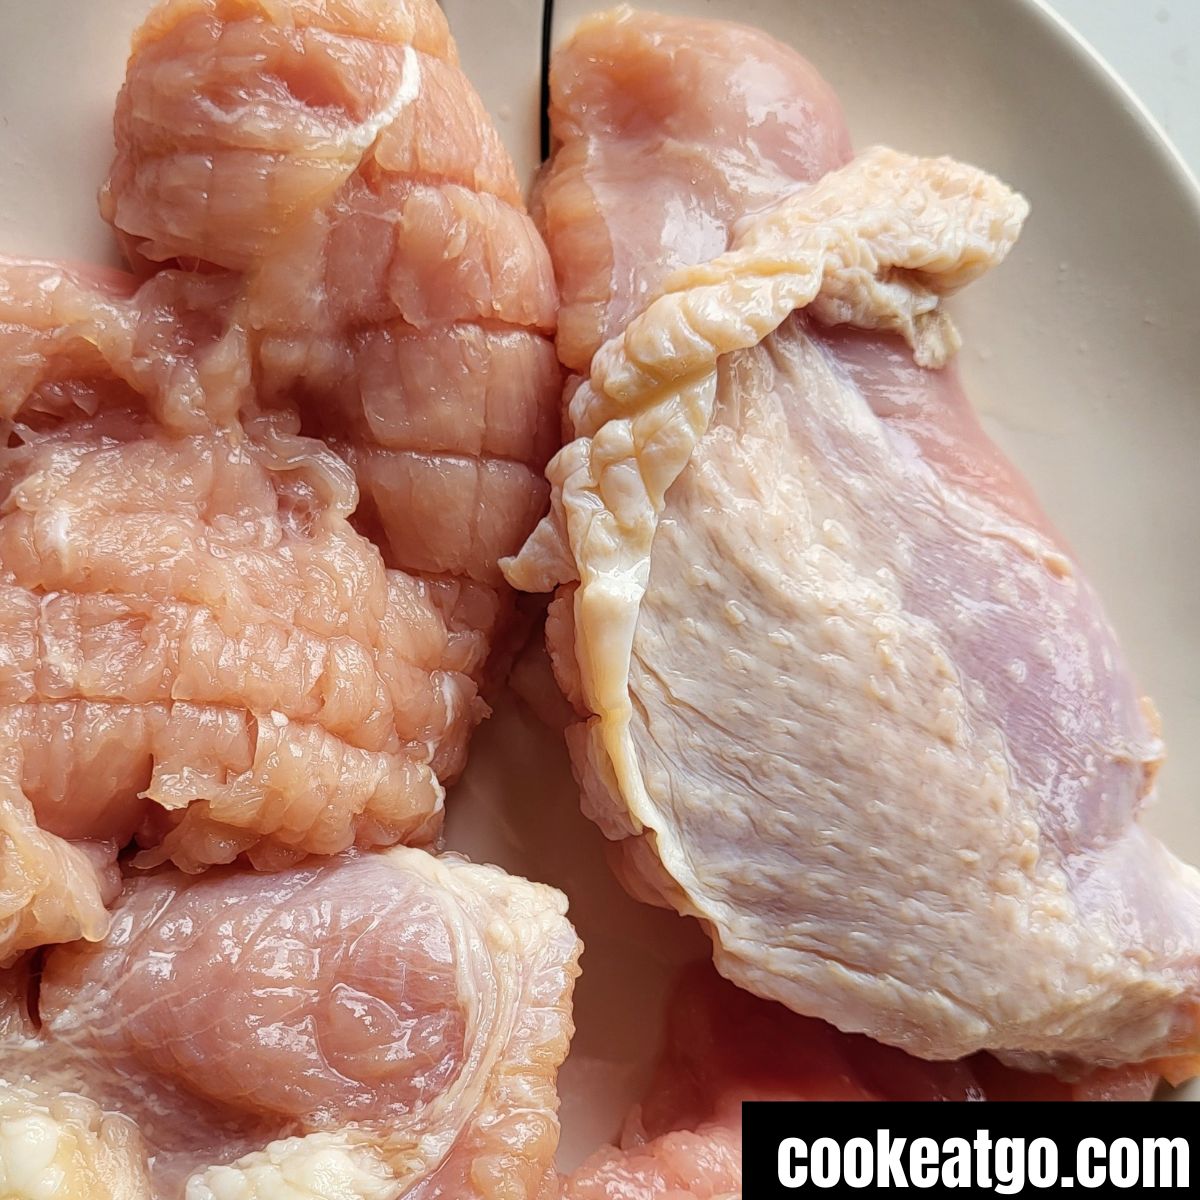 Uncooked chunks of turkey breasts on a plate